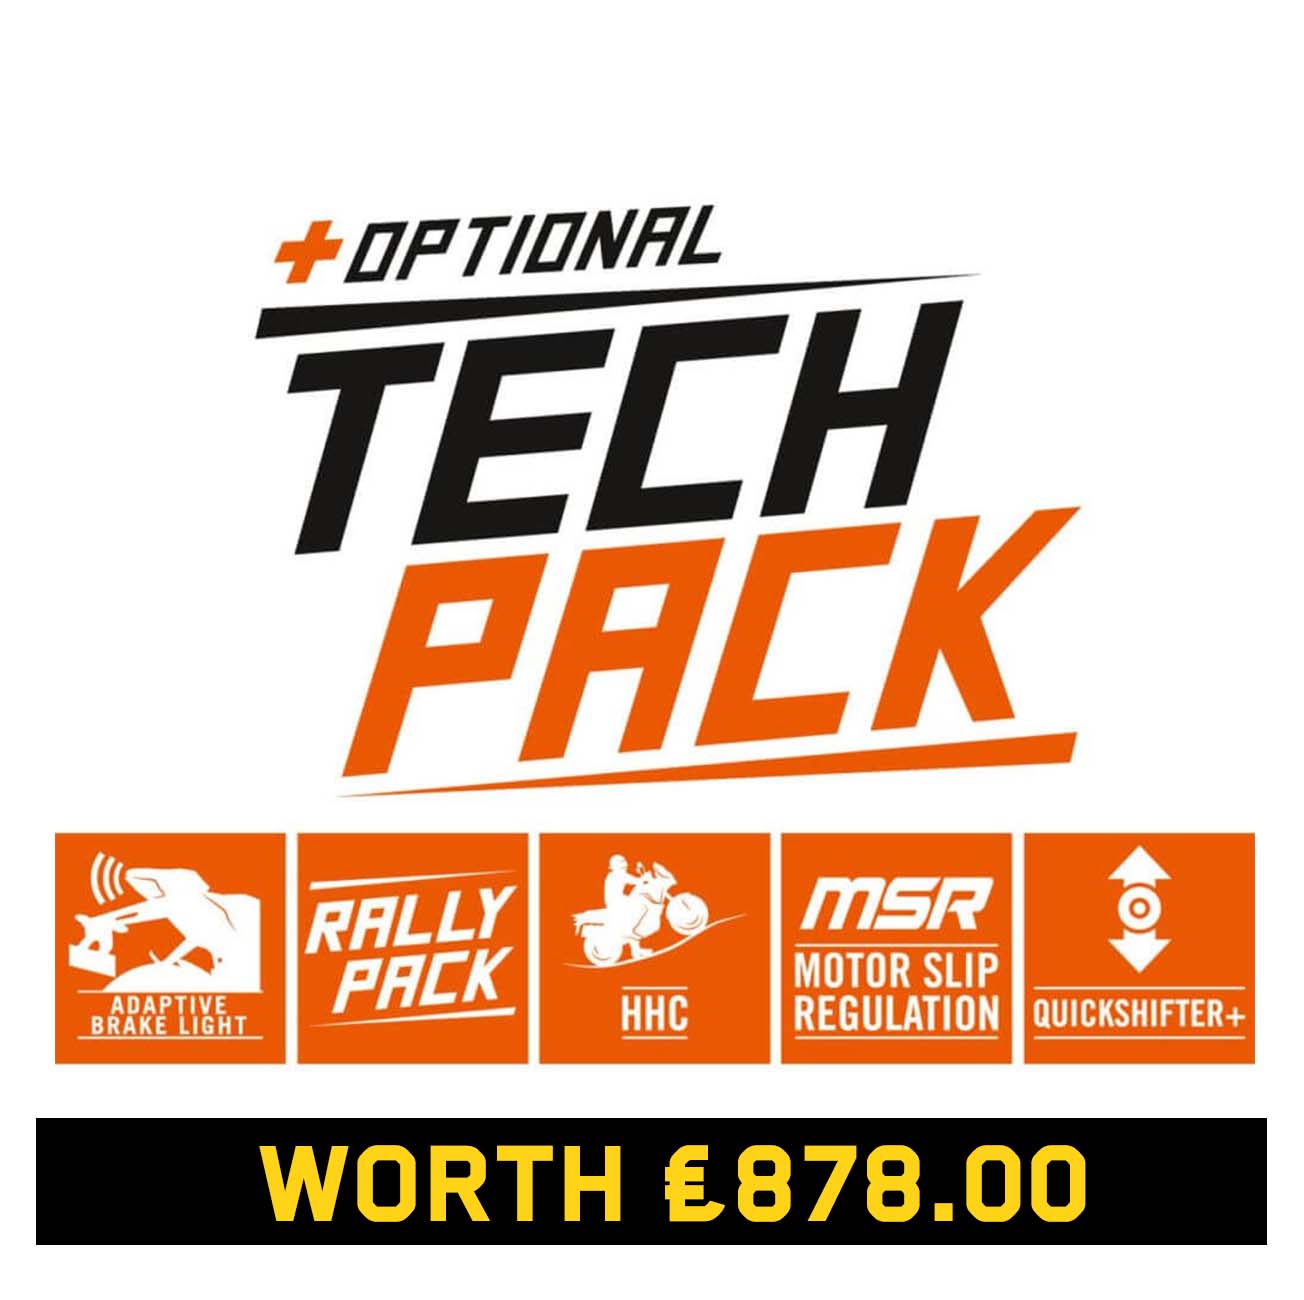 Laguna Exclusive KTM Tech Pack Offer on the 1290 Super Adventure R